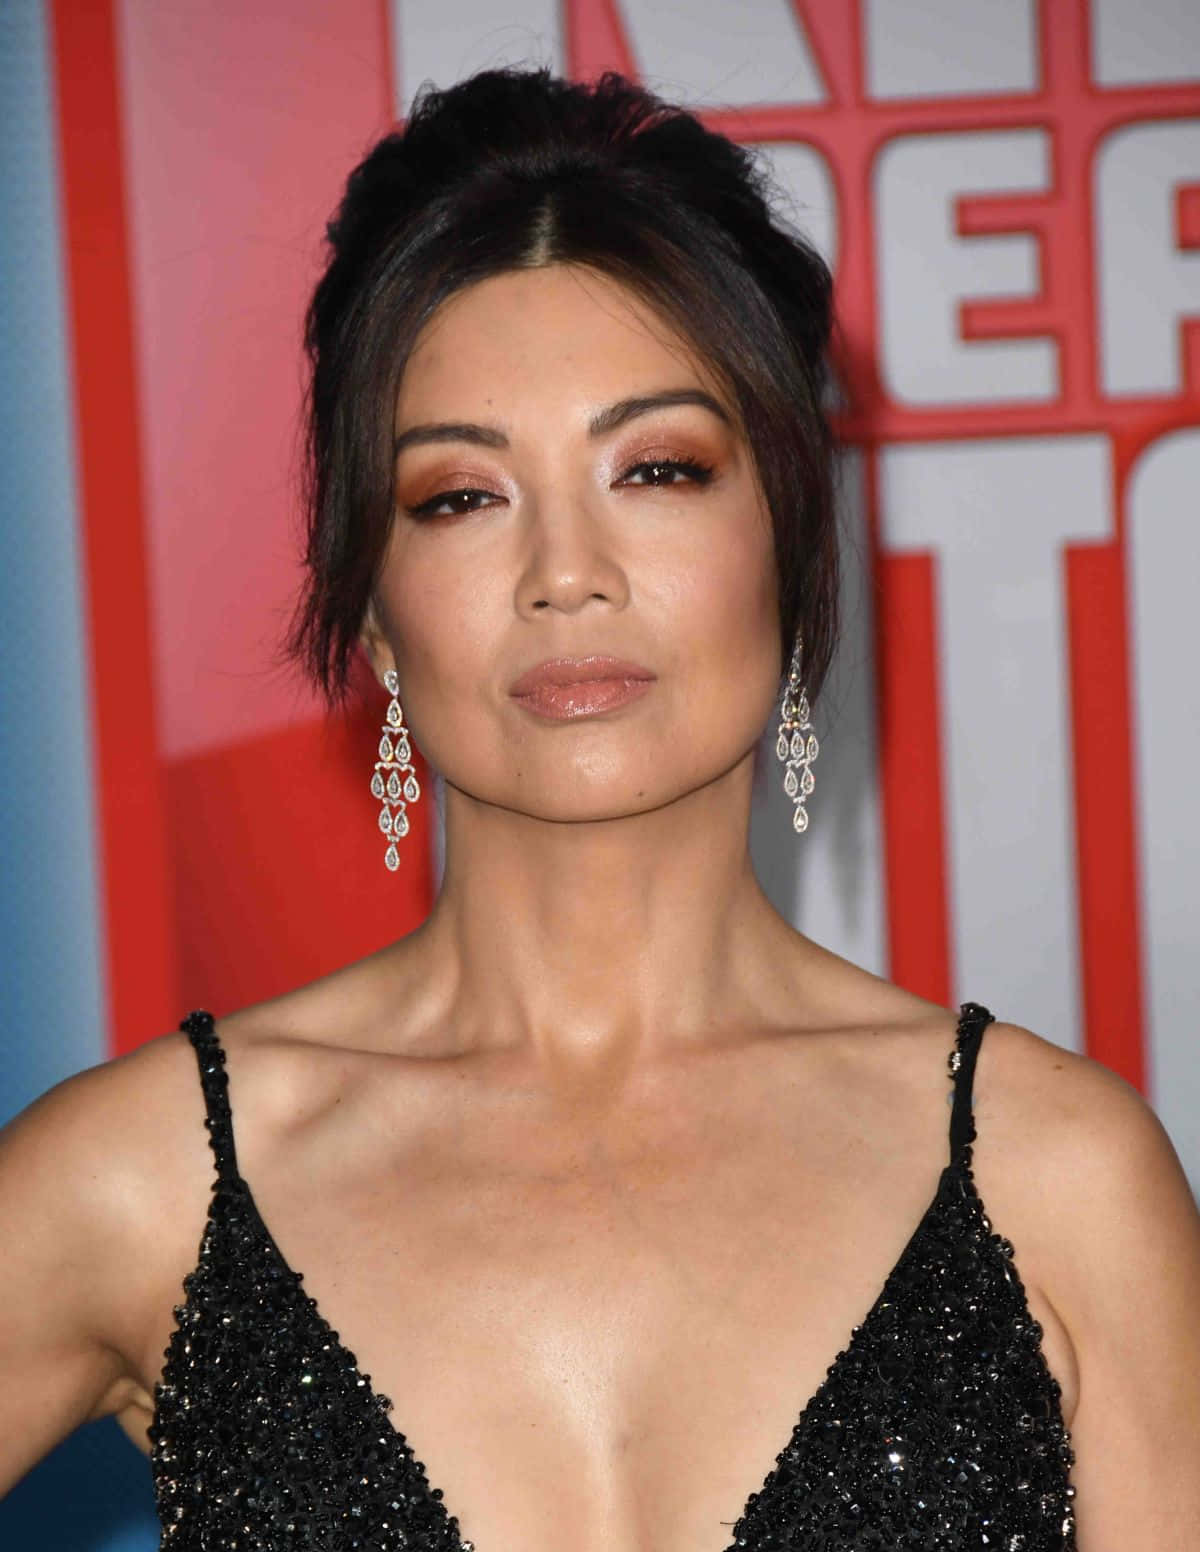 Ming-Na Wen posing elegantly in a stunning outfit Wallpaper